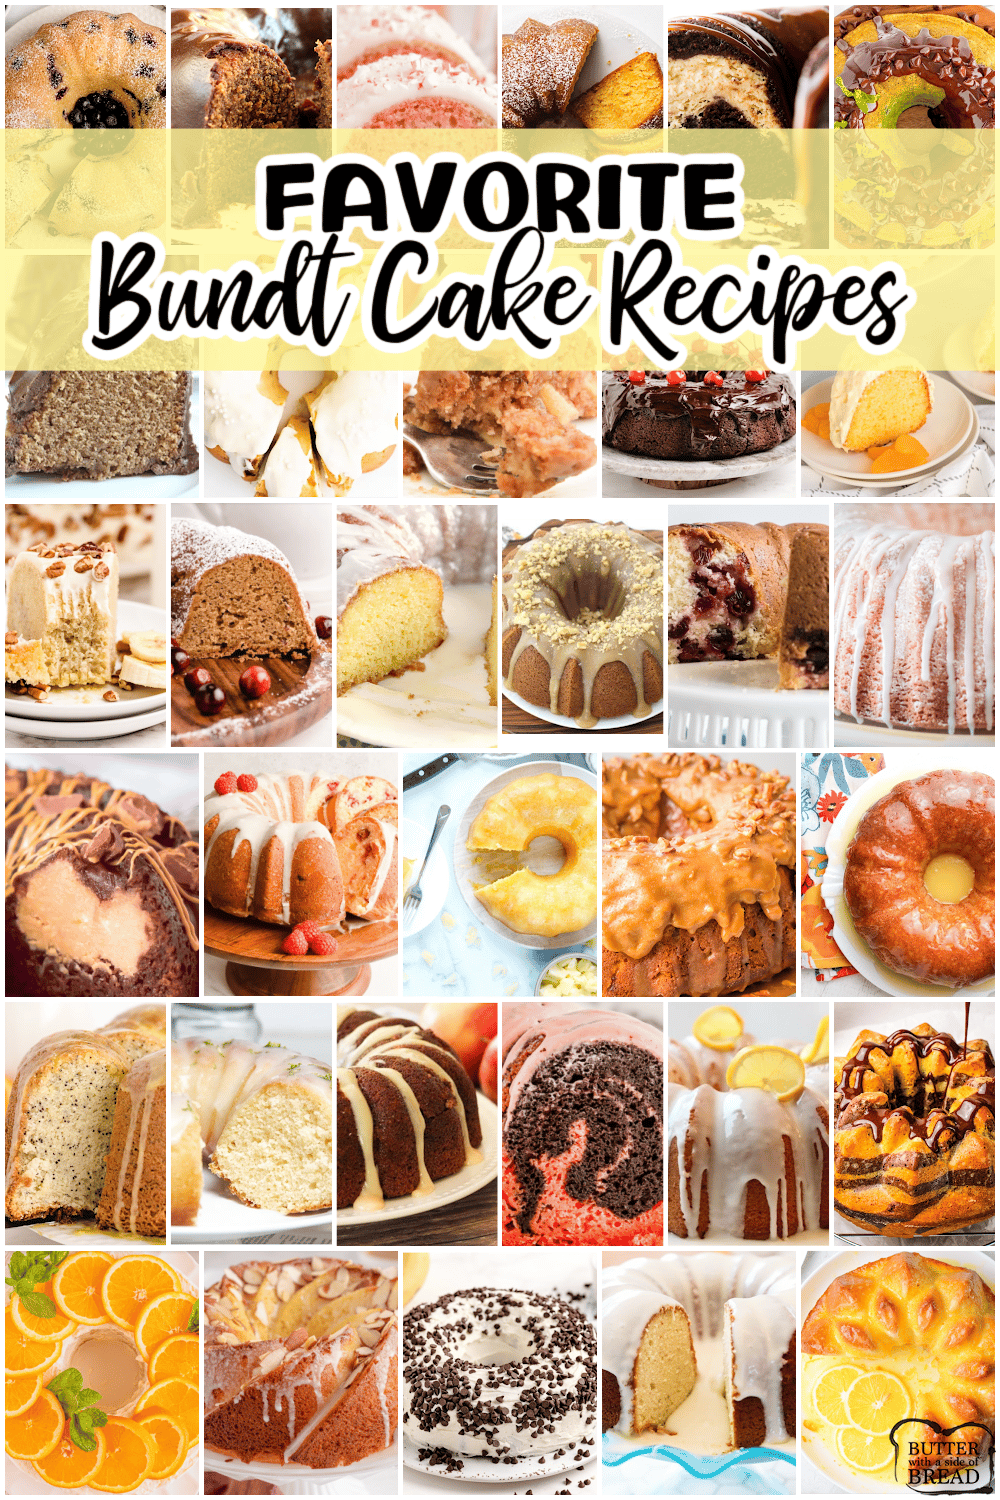 A fantastic collection of THE BEST bundt cake recipes! From summer barbecues to holiday parties, this tried and true collection of our favorite bundt cake recipes is one to save!